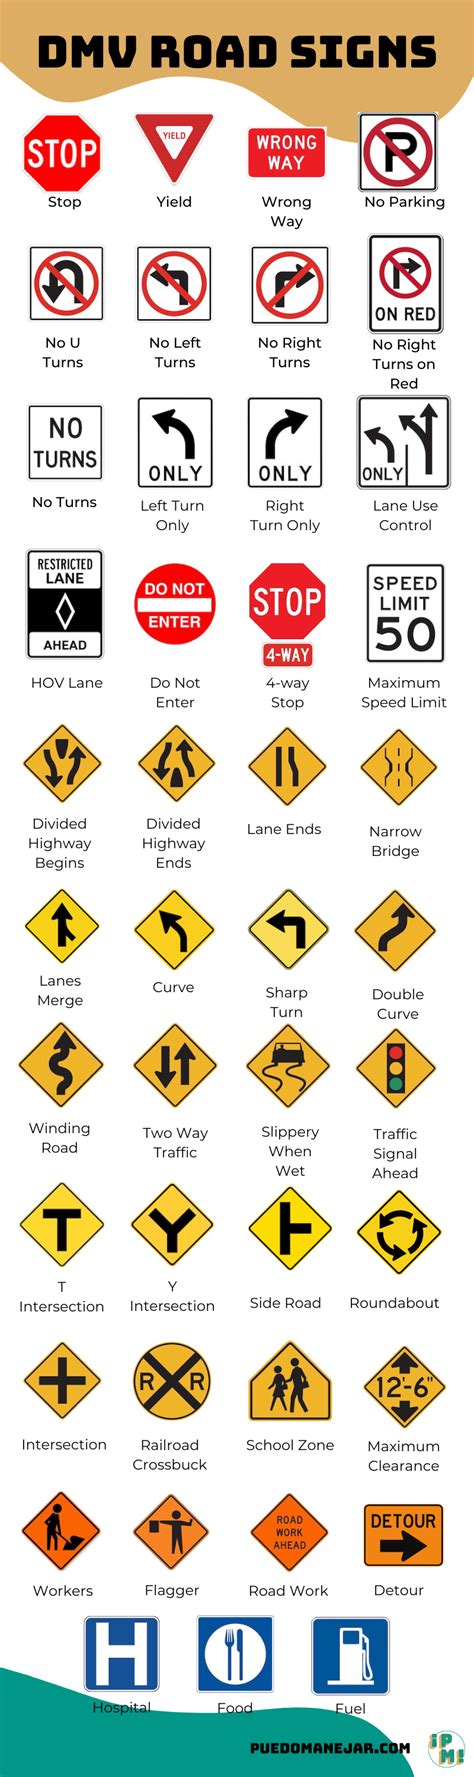 Street signs dmv test. Psychiatric conditions are easy to fake, because there are no truly objective tests for their diagnoses. In on Psychiatric conditions are easy to fake, because there are no truly o... 